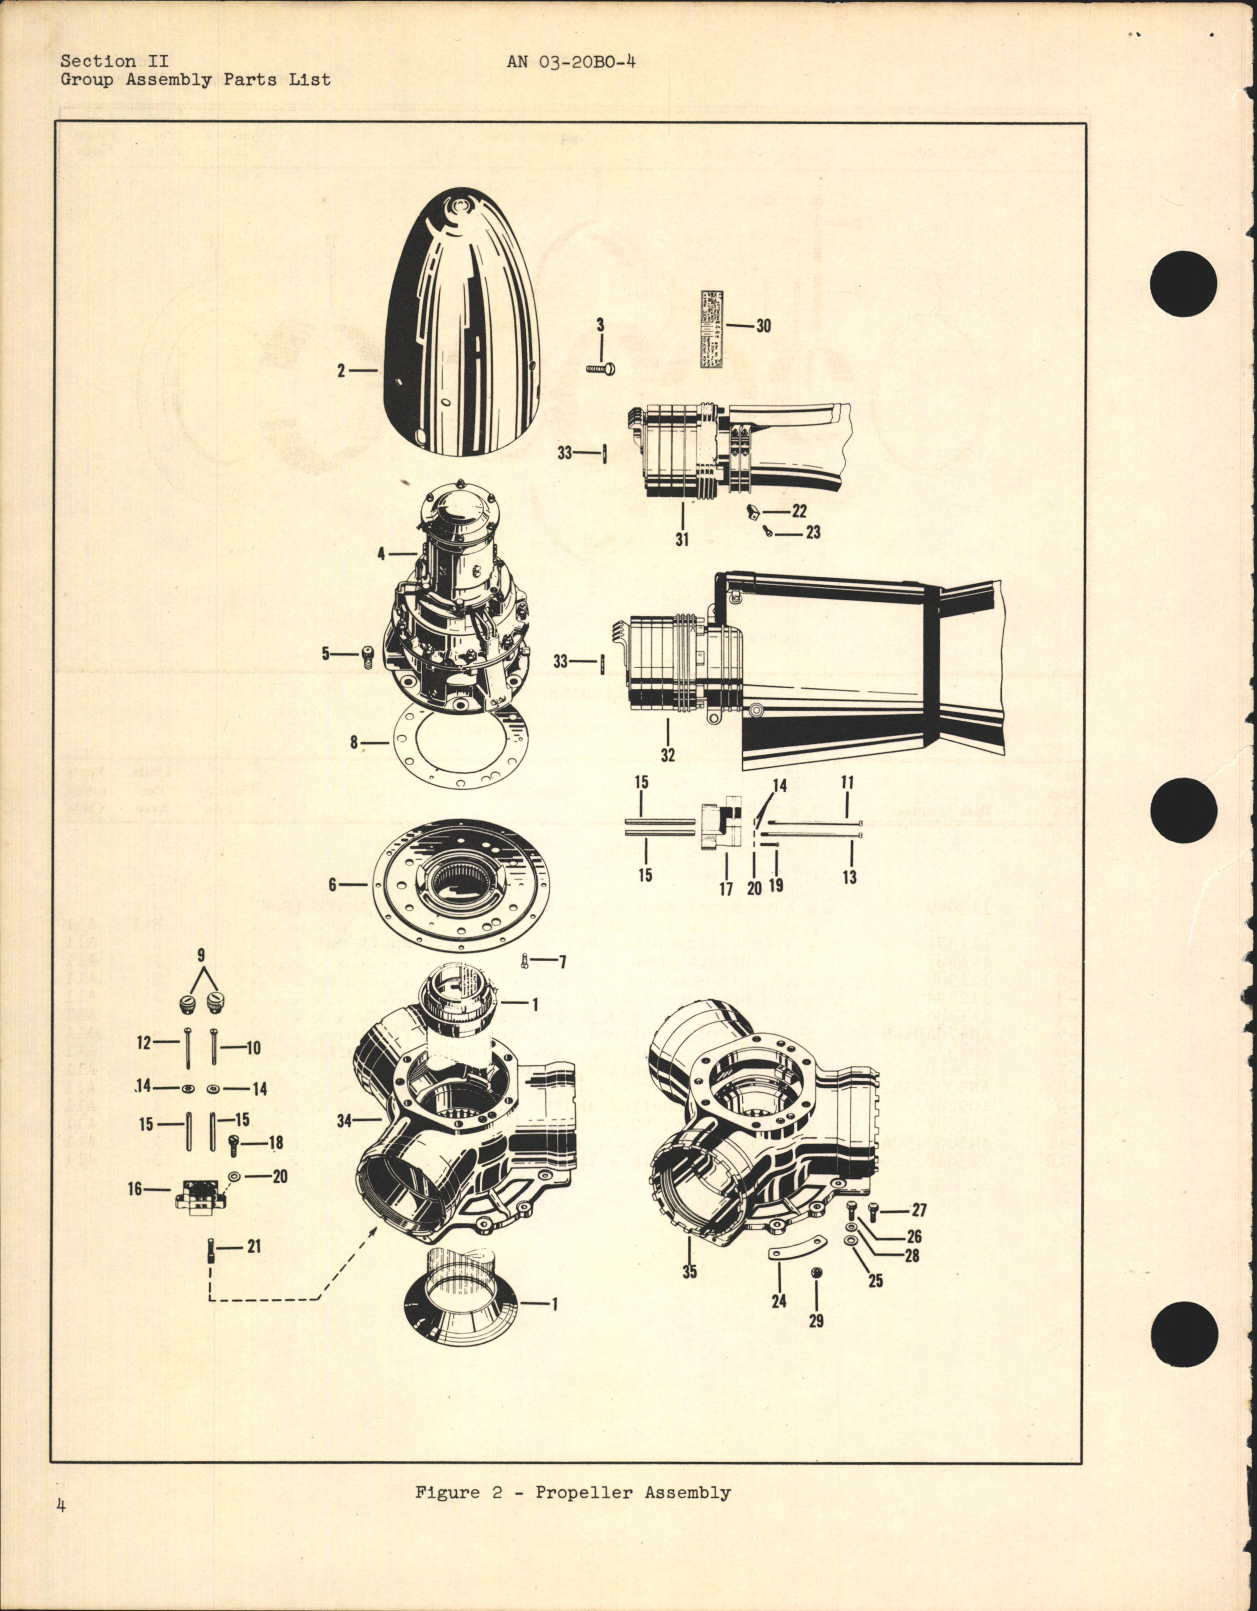 Sample page 8 from AirCorps Library document: Parts Catalog for Curtiss Electric Propeller Model C532S-E